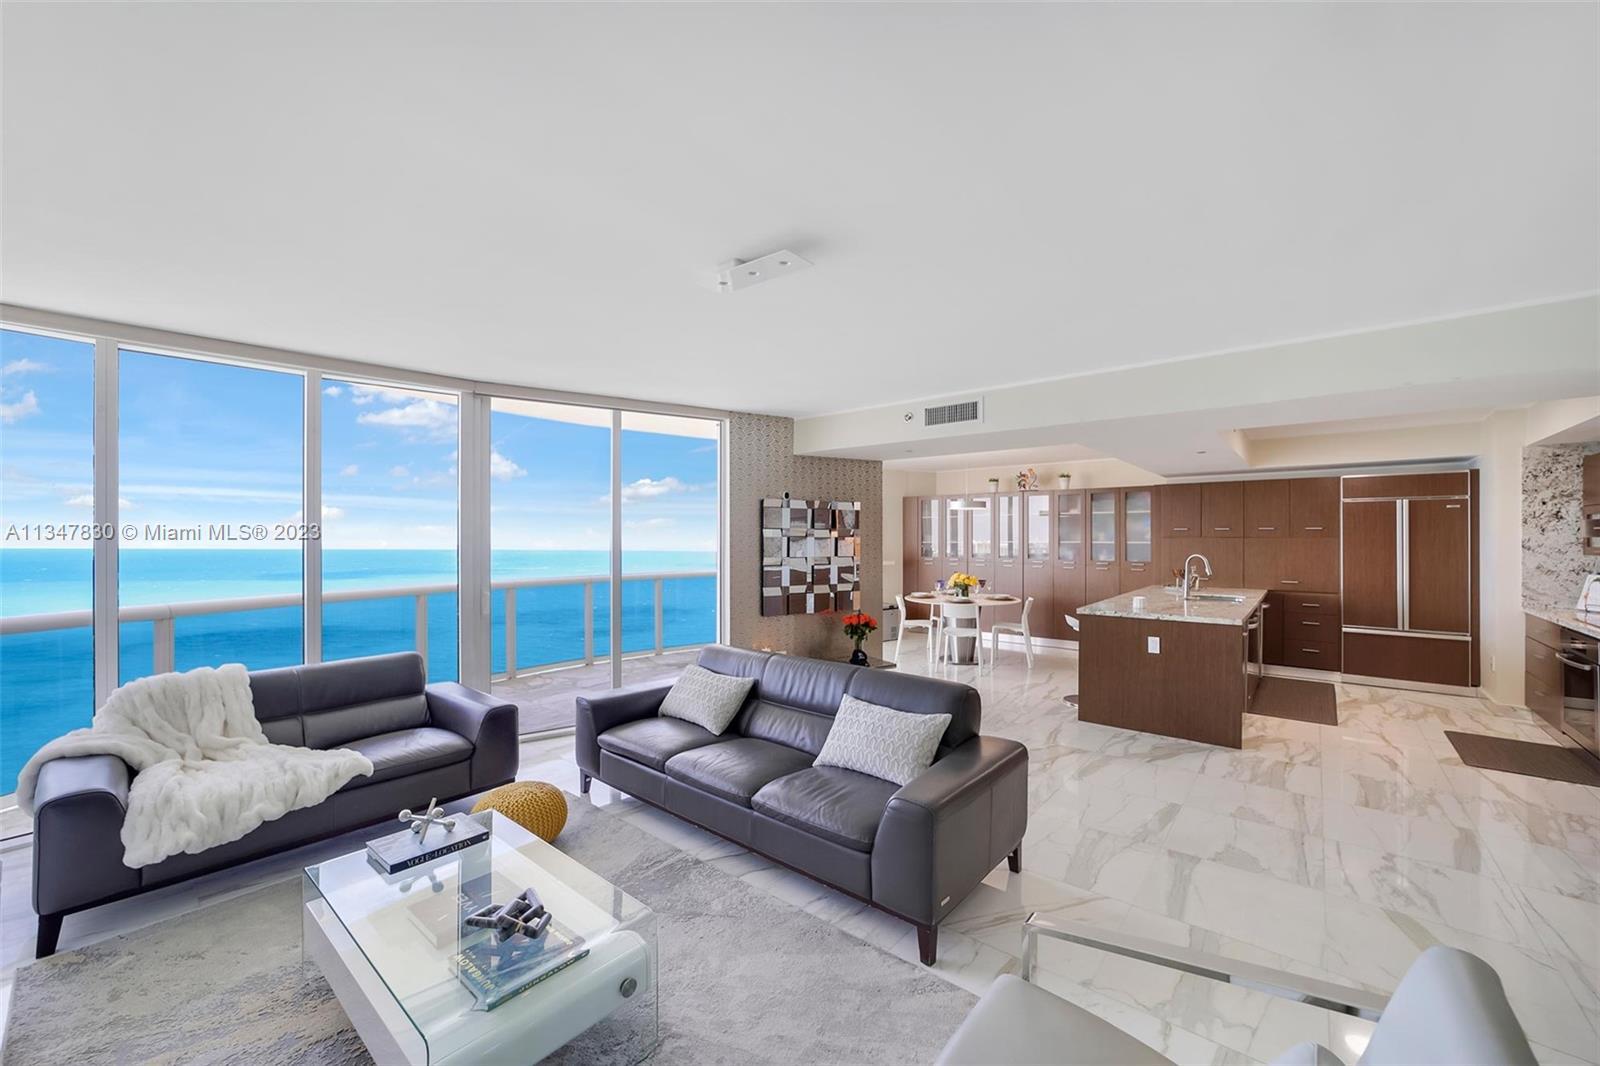 Discover the perfect seaside retreat in this beautiful penthouse & be swept away by this impressive 